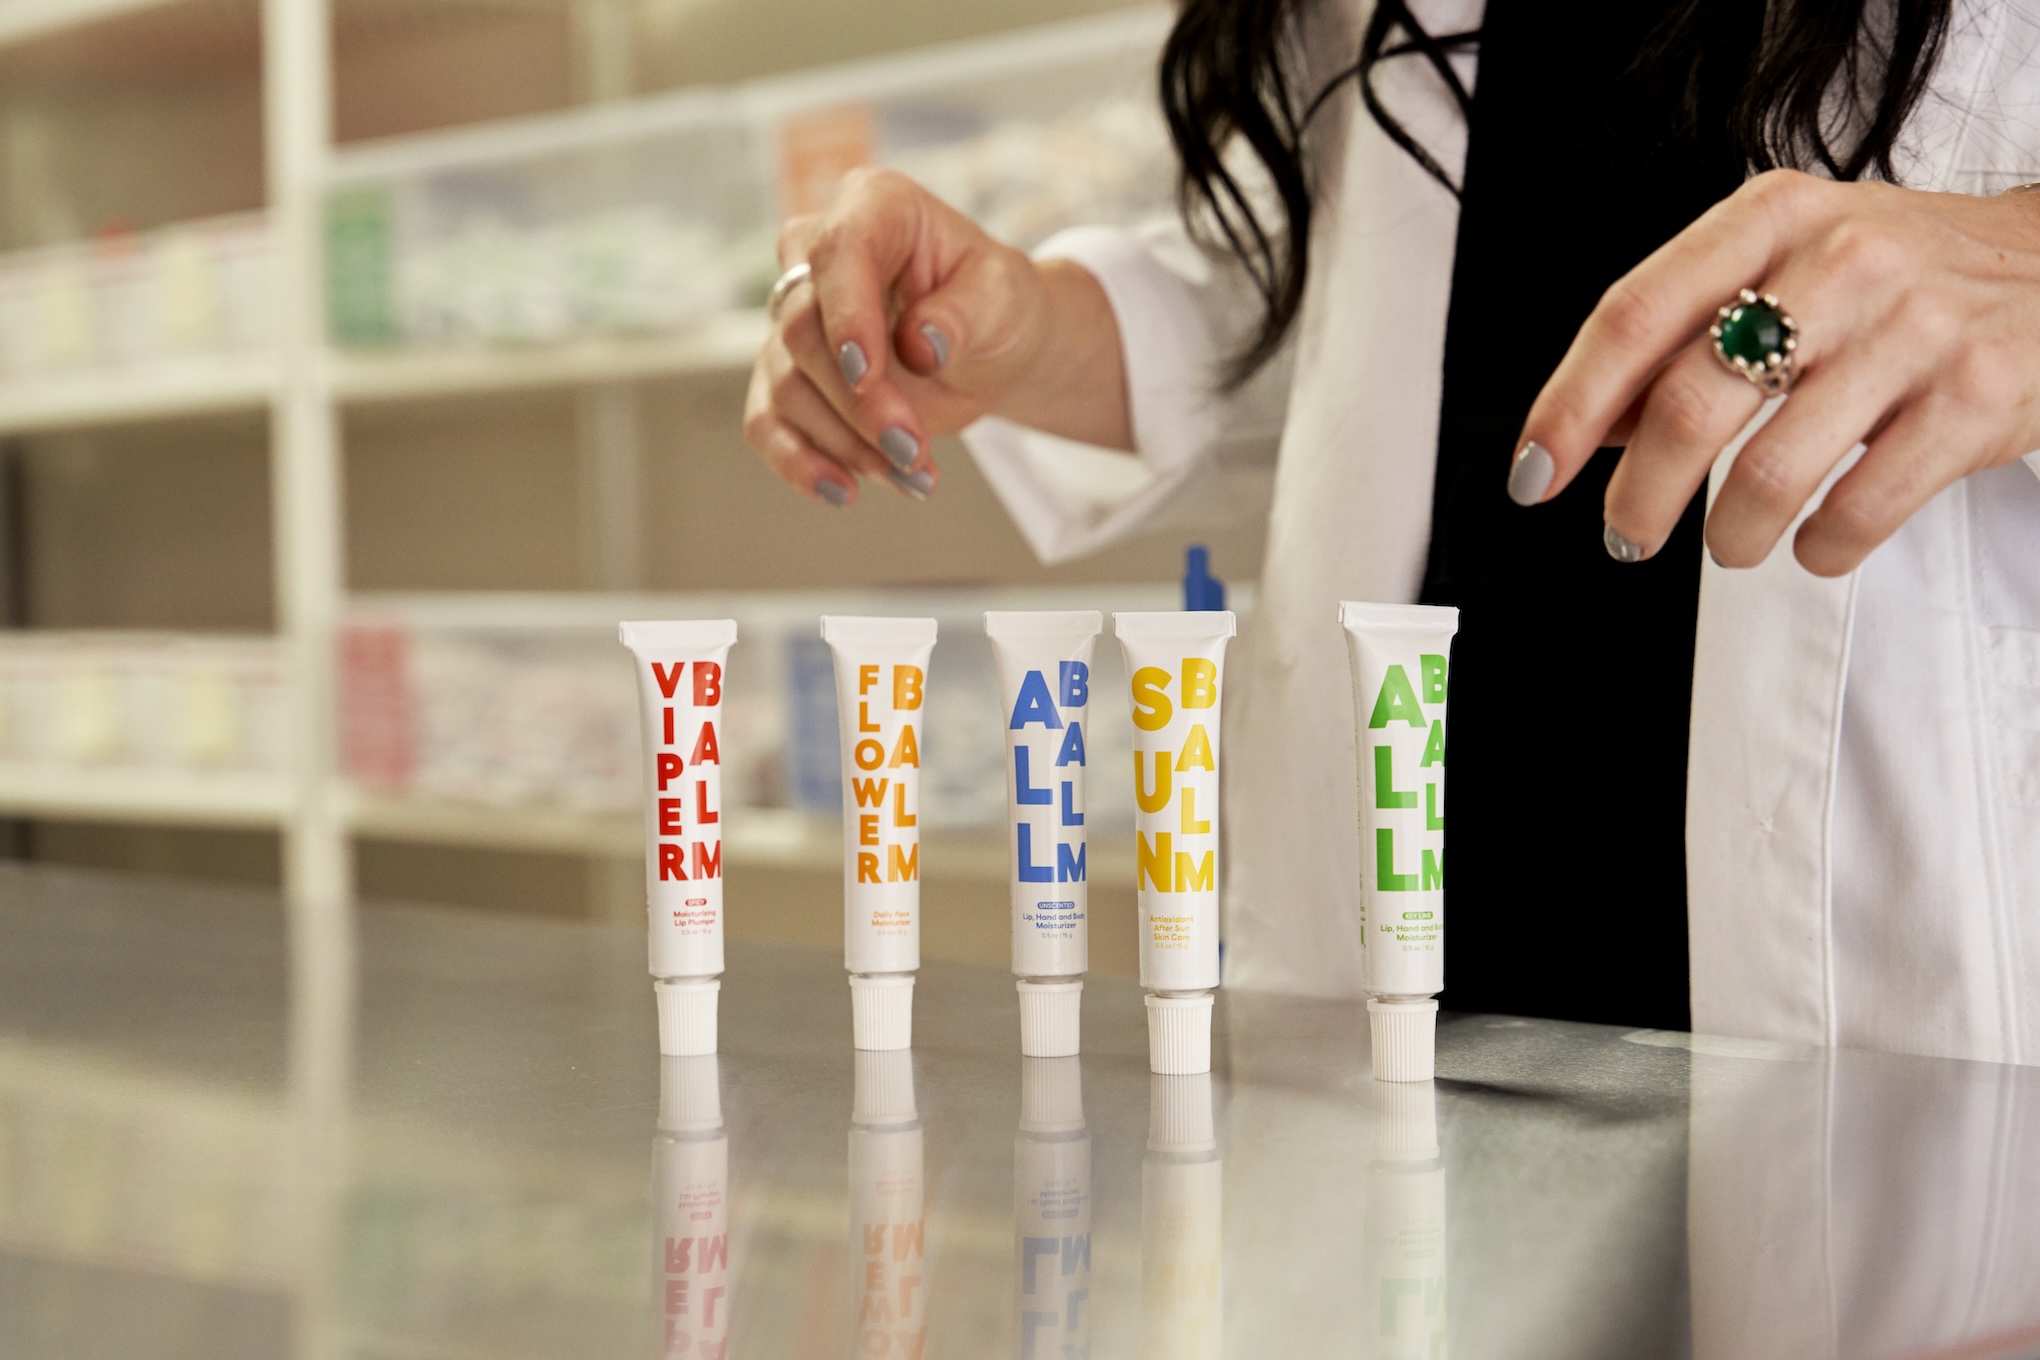 A woman's hands appear above tubes of balms with brightly colored packaging